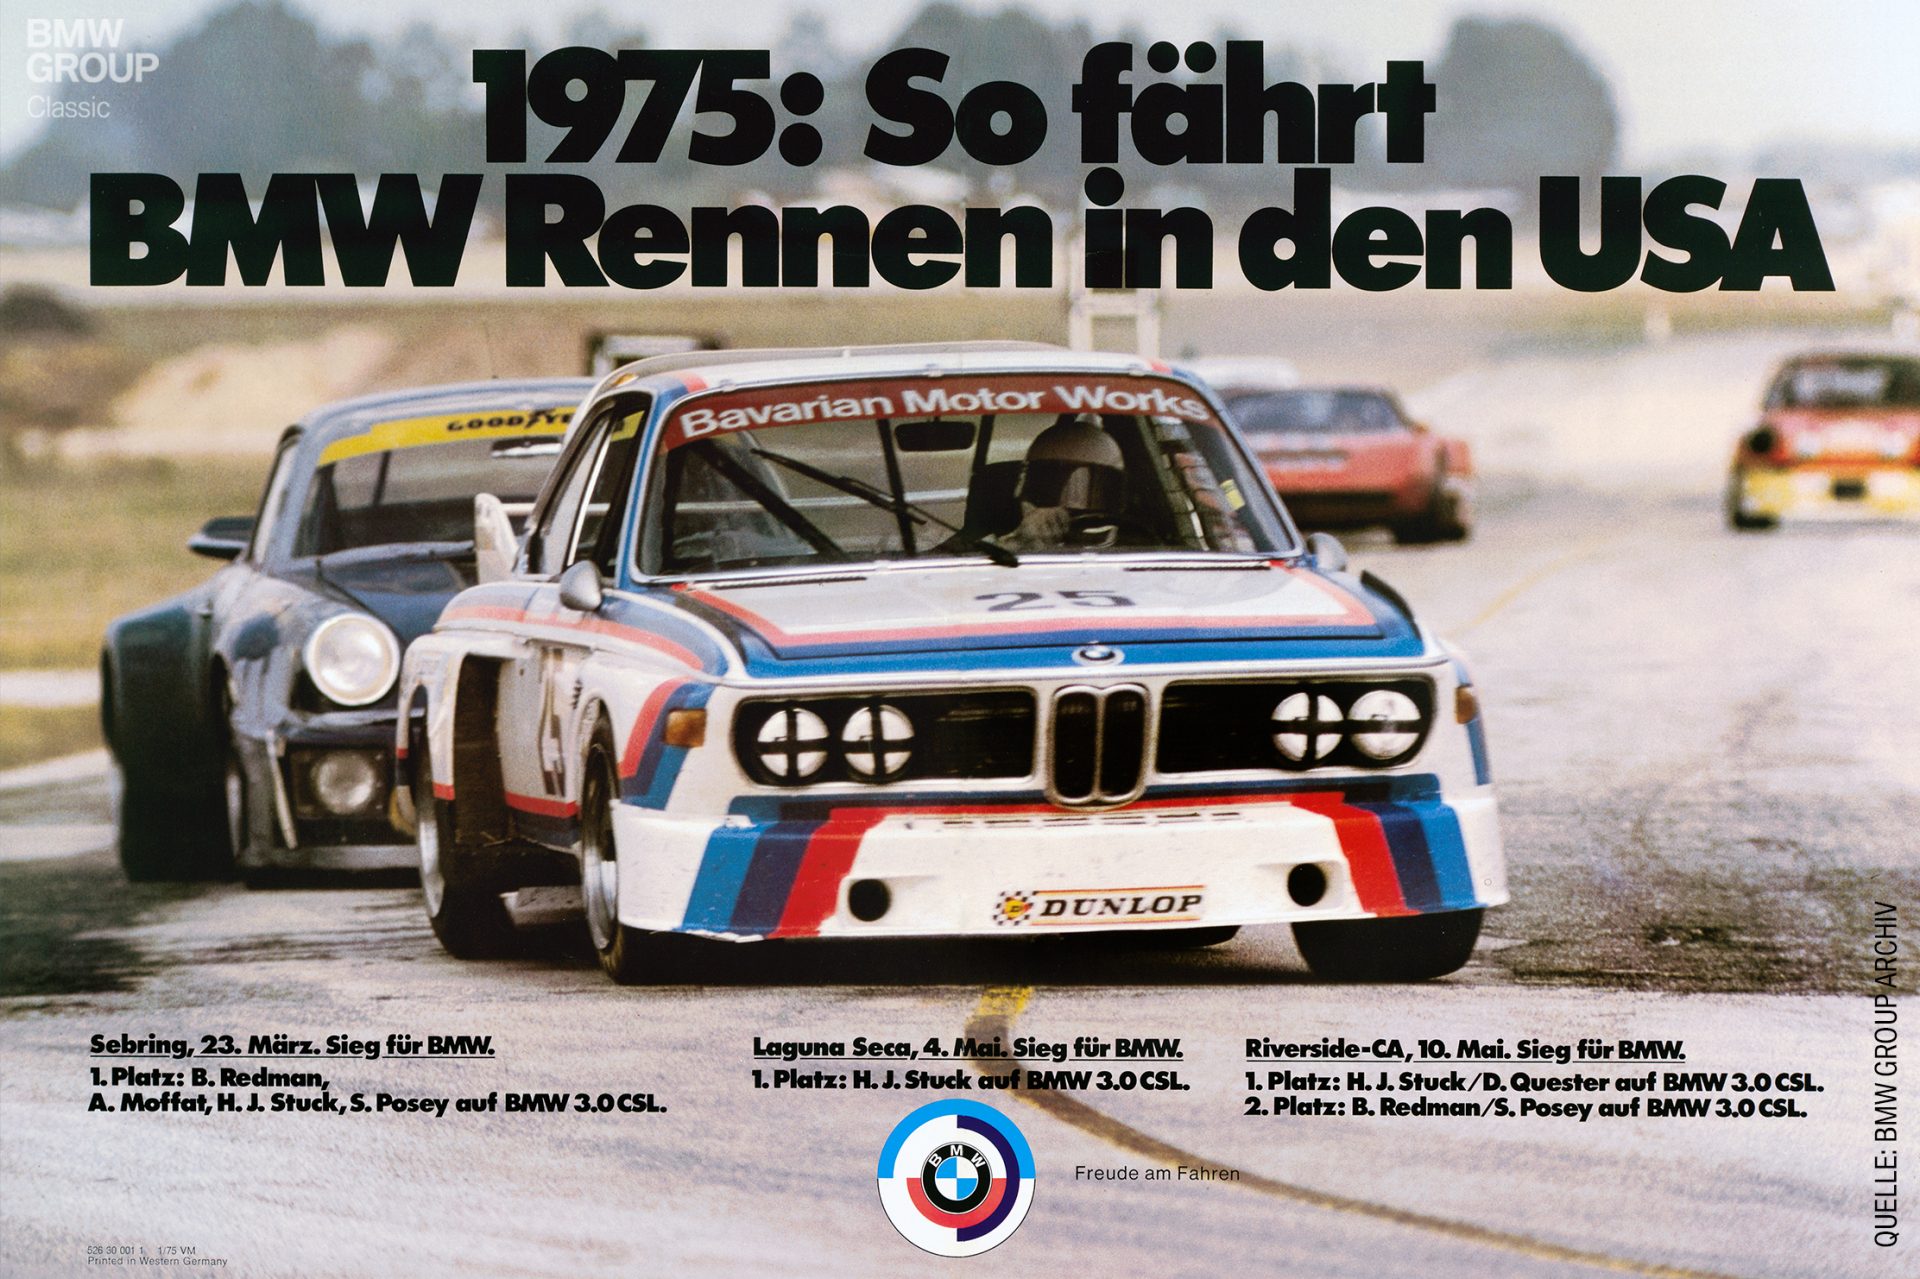 BMW 3.0 CSL in a turn at a car race in the 70s